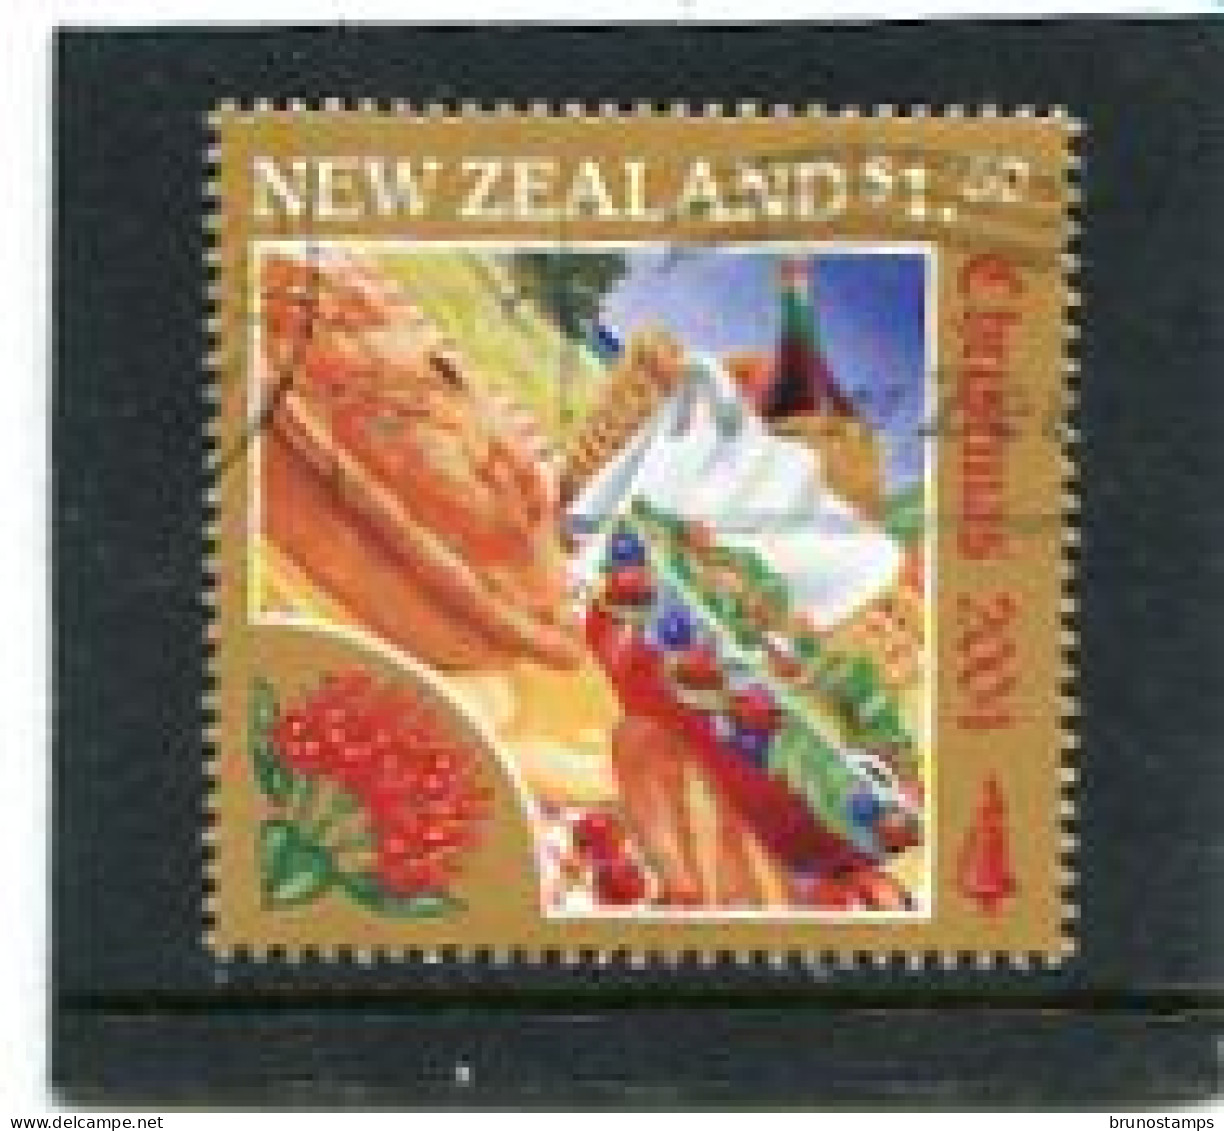 NEW ZEALAND - 2004  1.50$  CHRISTMAS  FINE  USED - Used Stamps